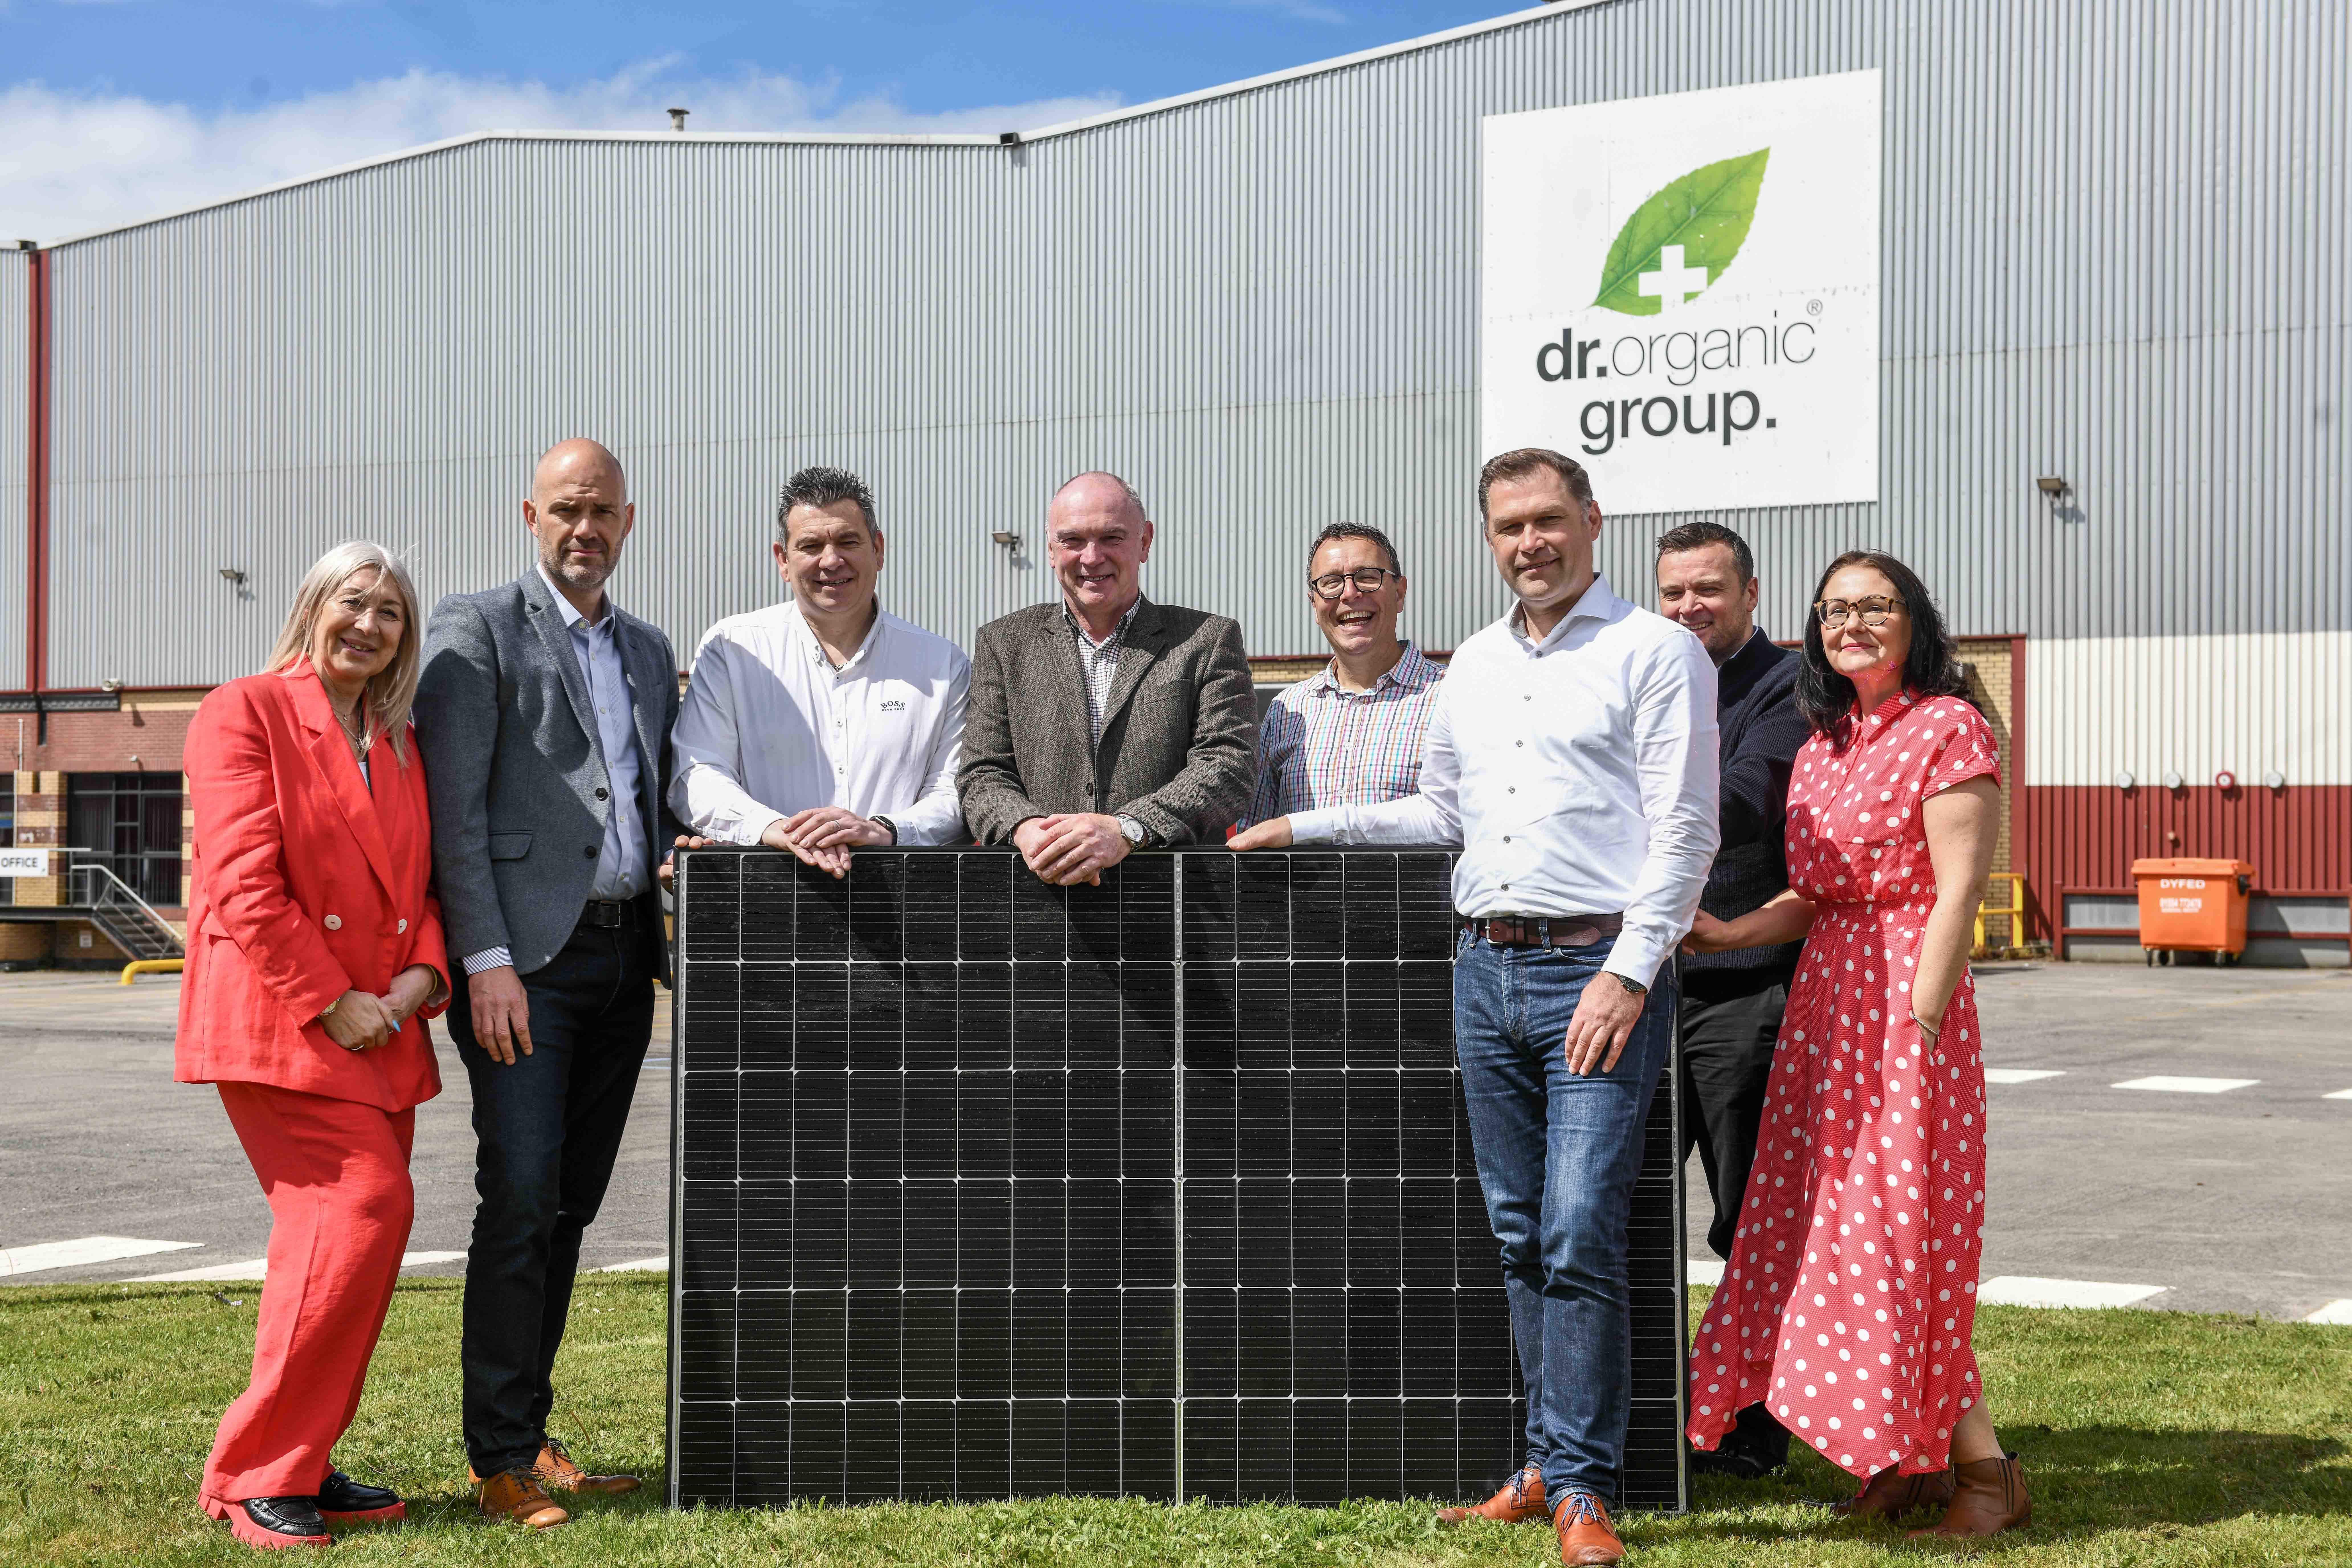 Swansea-based organic beauty and personal care business, Dr. Organic Group has invested in a new rooftop solar panel project that should generate 584,306 kWh electricity every year, saving a projected 123,260 Kg of CO² per year.